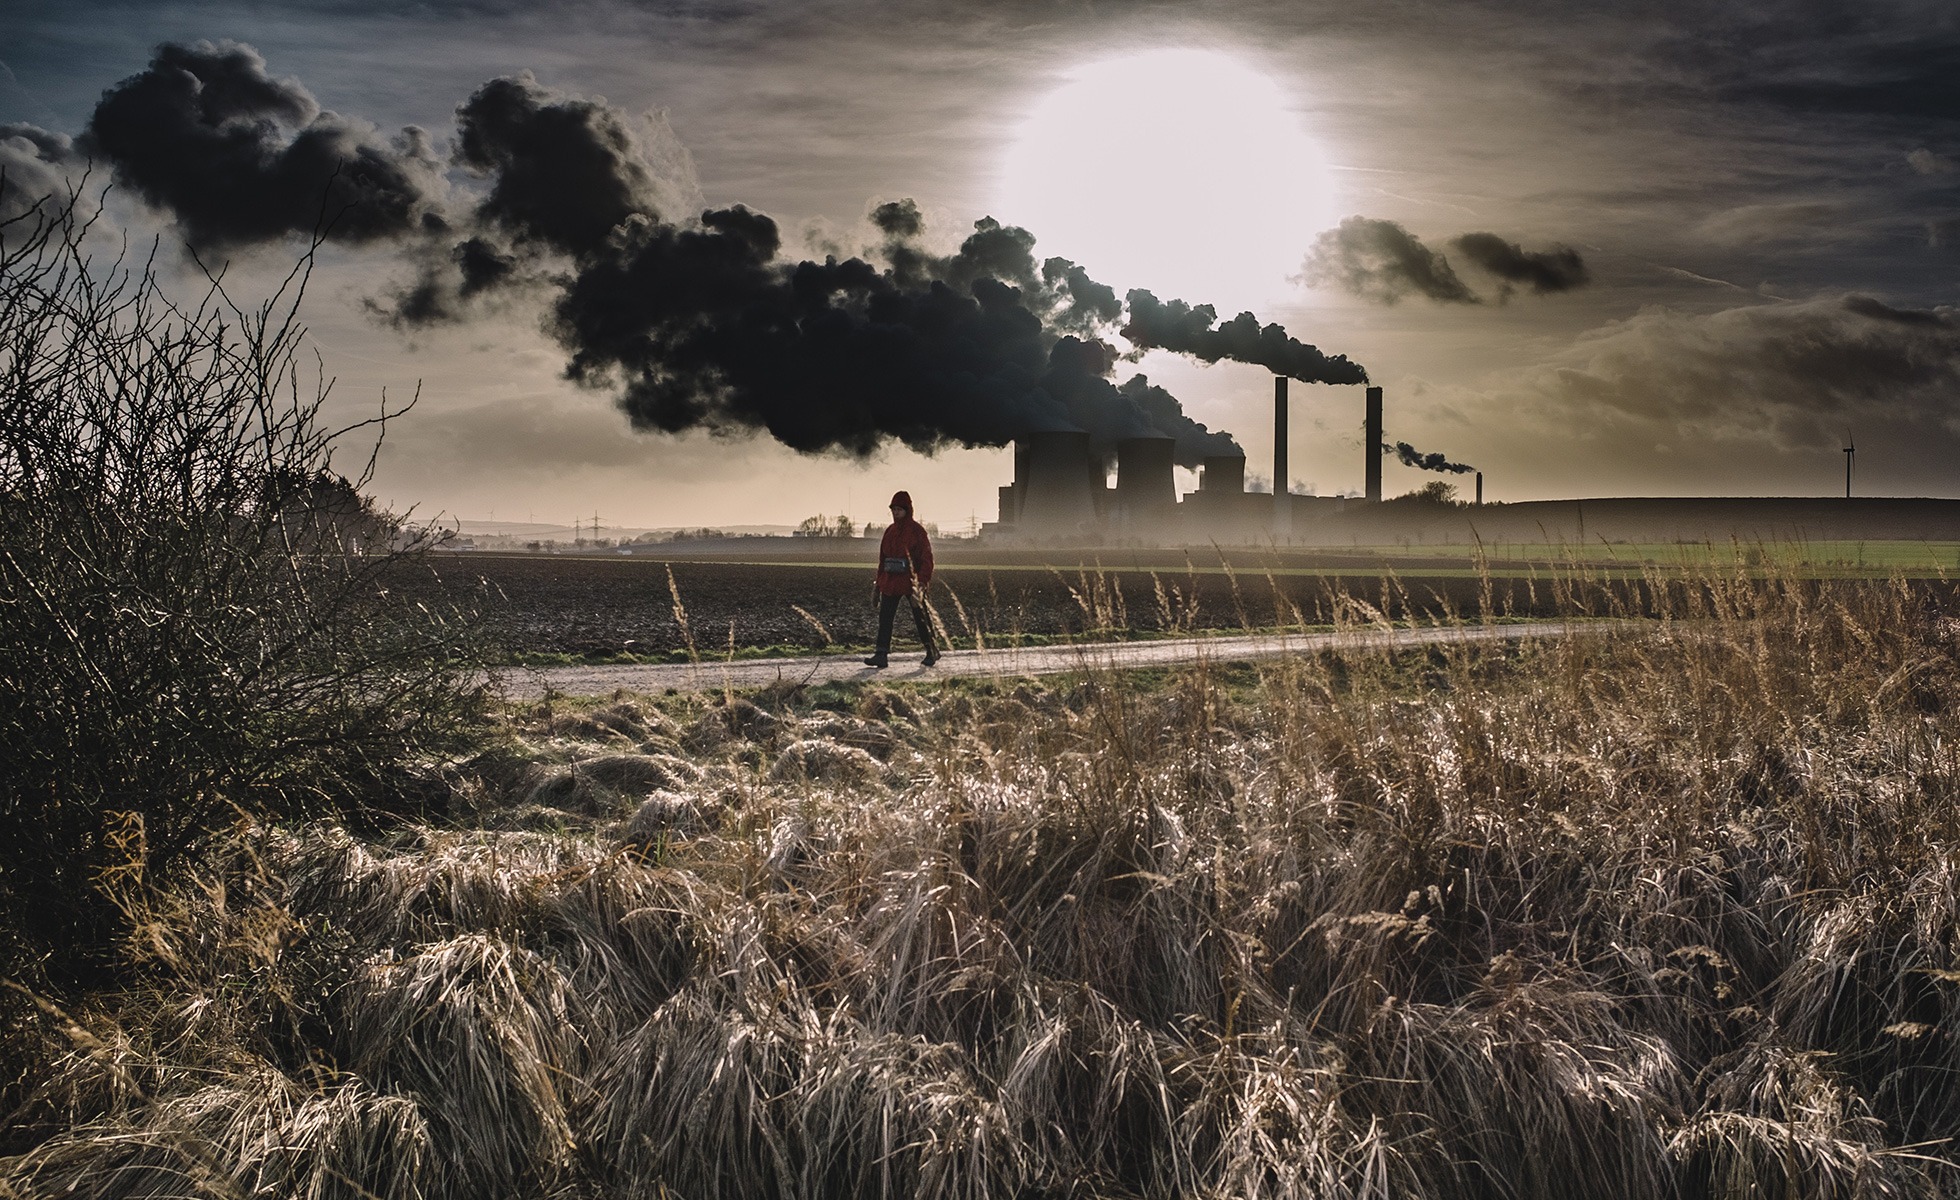 A person walks past polluting industrial activity in a rural area